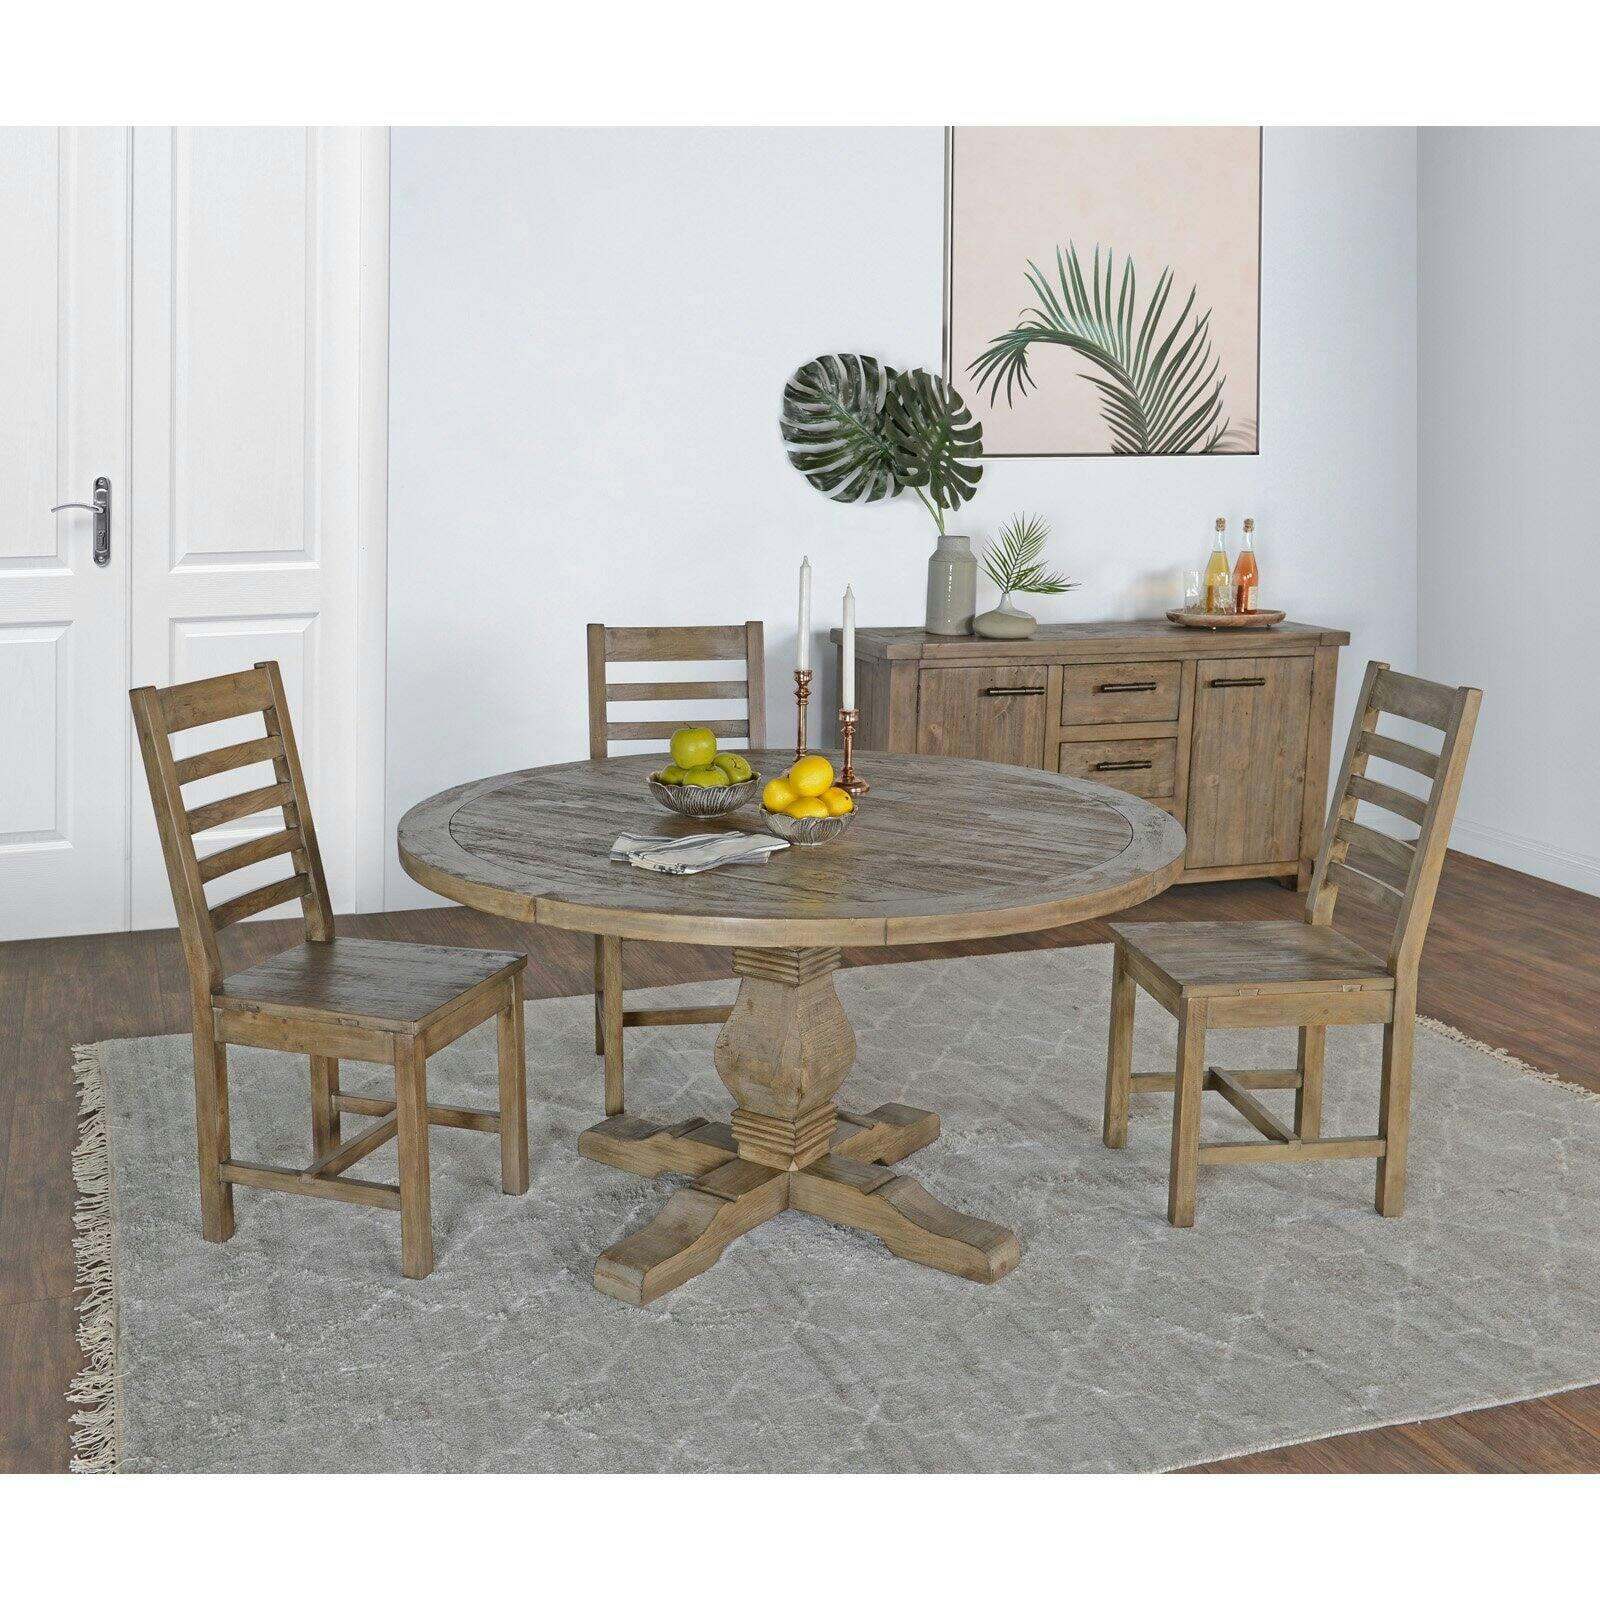 Quincy 55" Reclaimed Pine Round Dining Table in Desert Finish